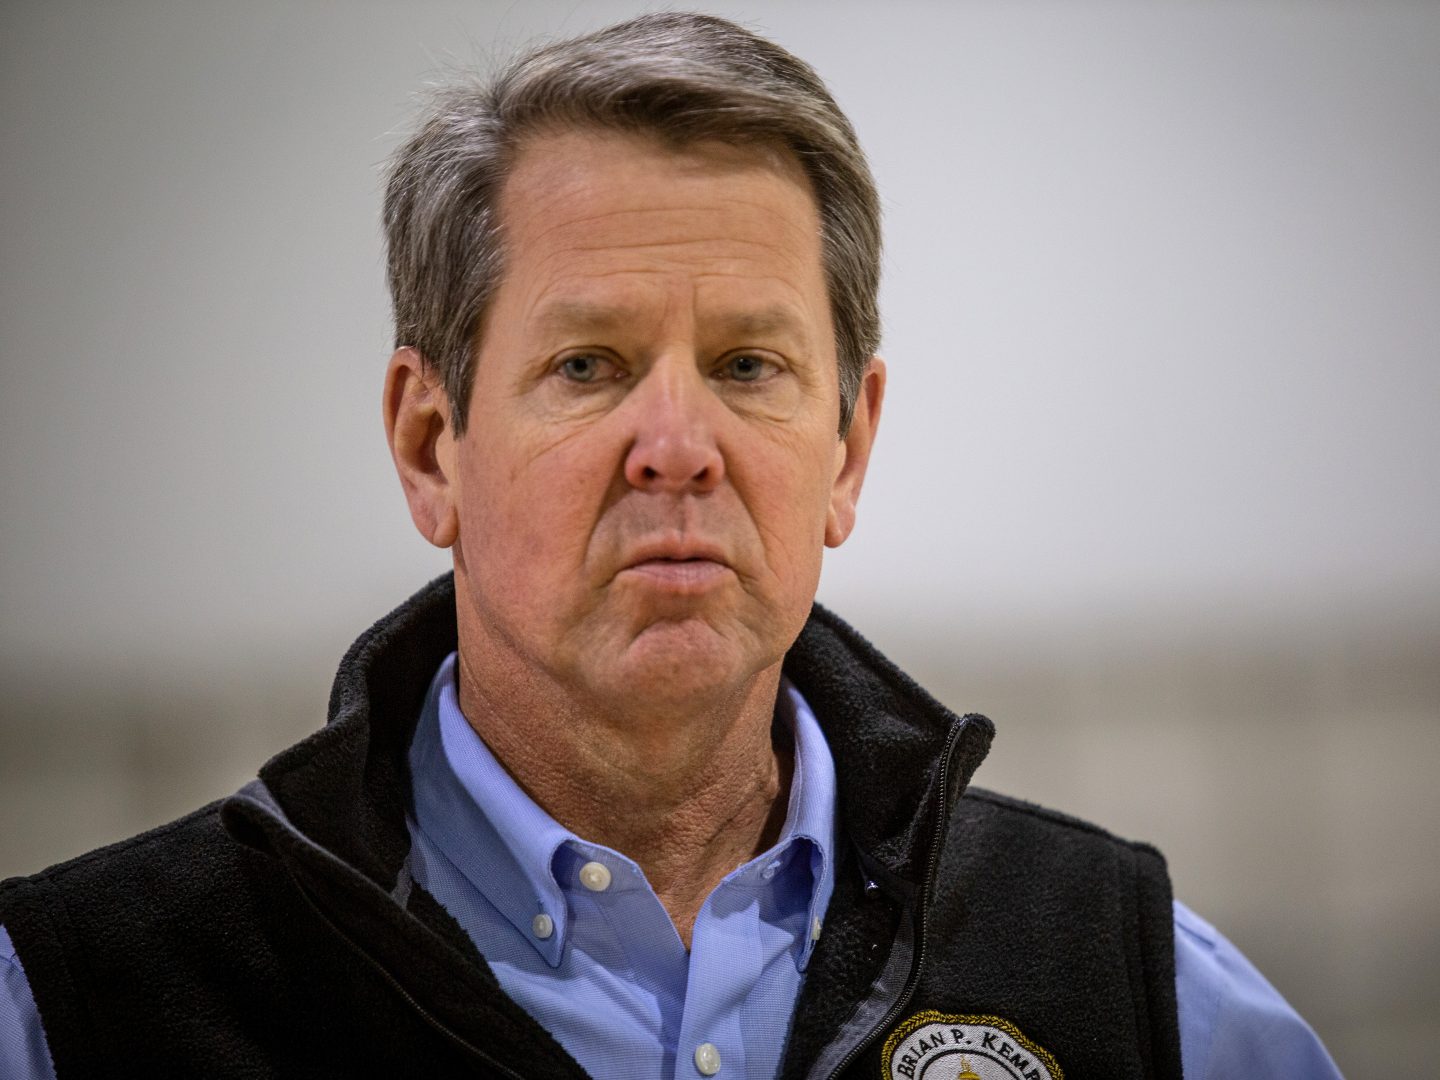 Georgia Gov. Brian Kemp, pictured on April 16, insists he is moving forward with plans to allow some nonessential businesses to open their doors to the public. The plan has come under intense criticism.